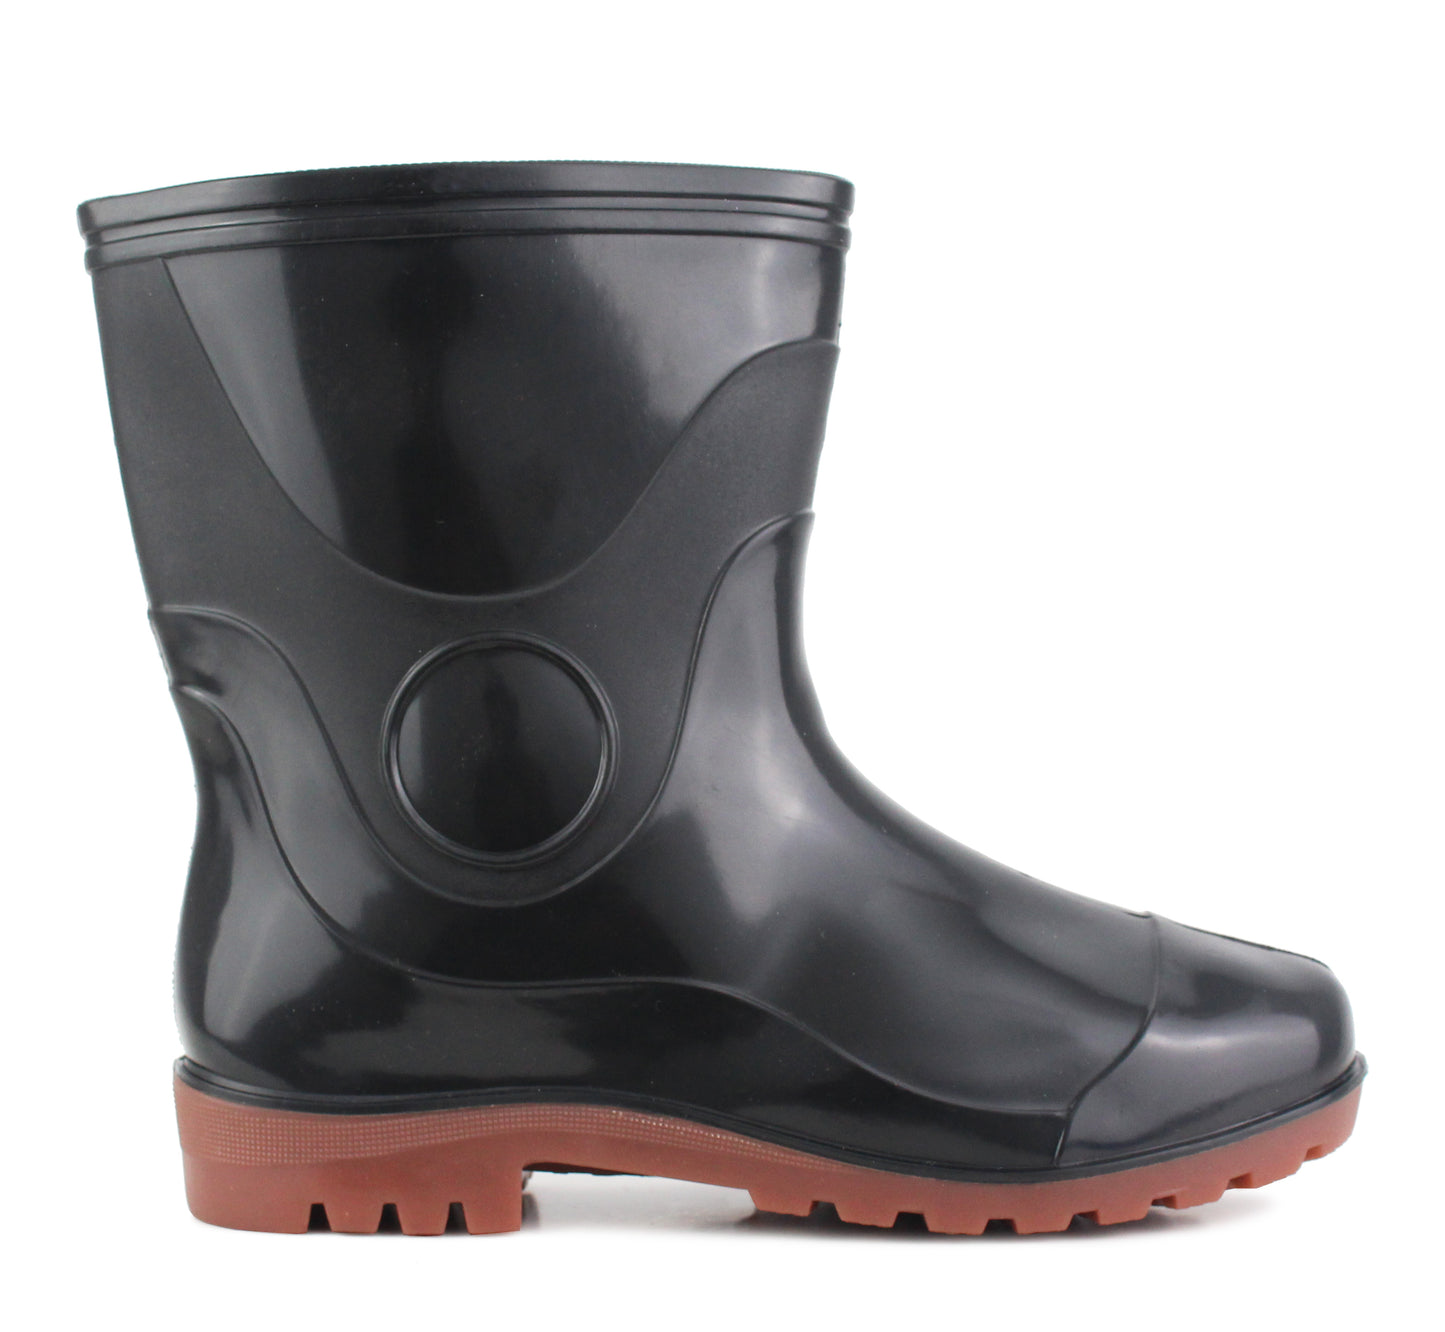 IMTY668 Unisex Mid Calf Ankle Wellies in Black